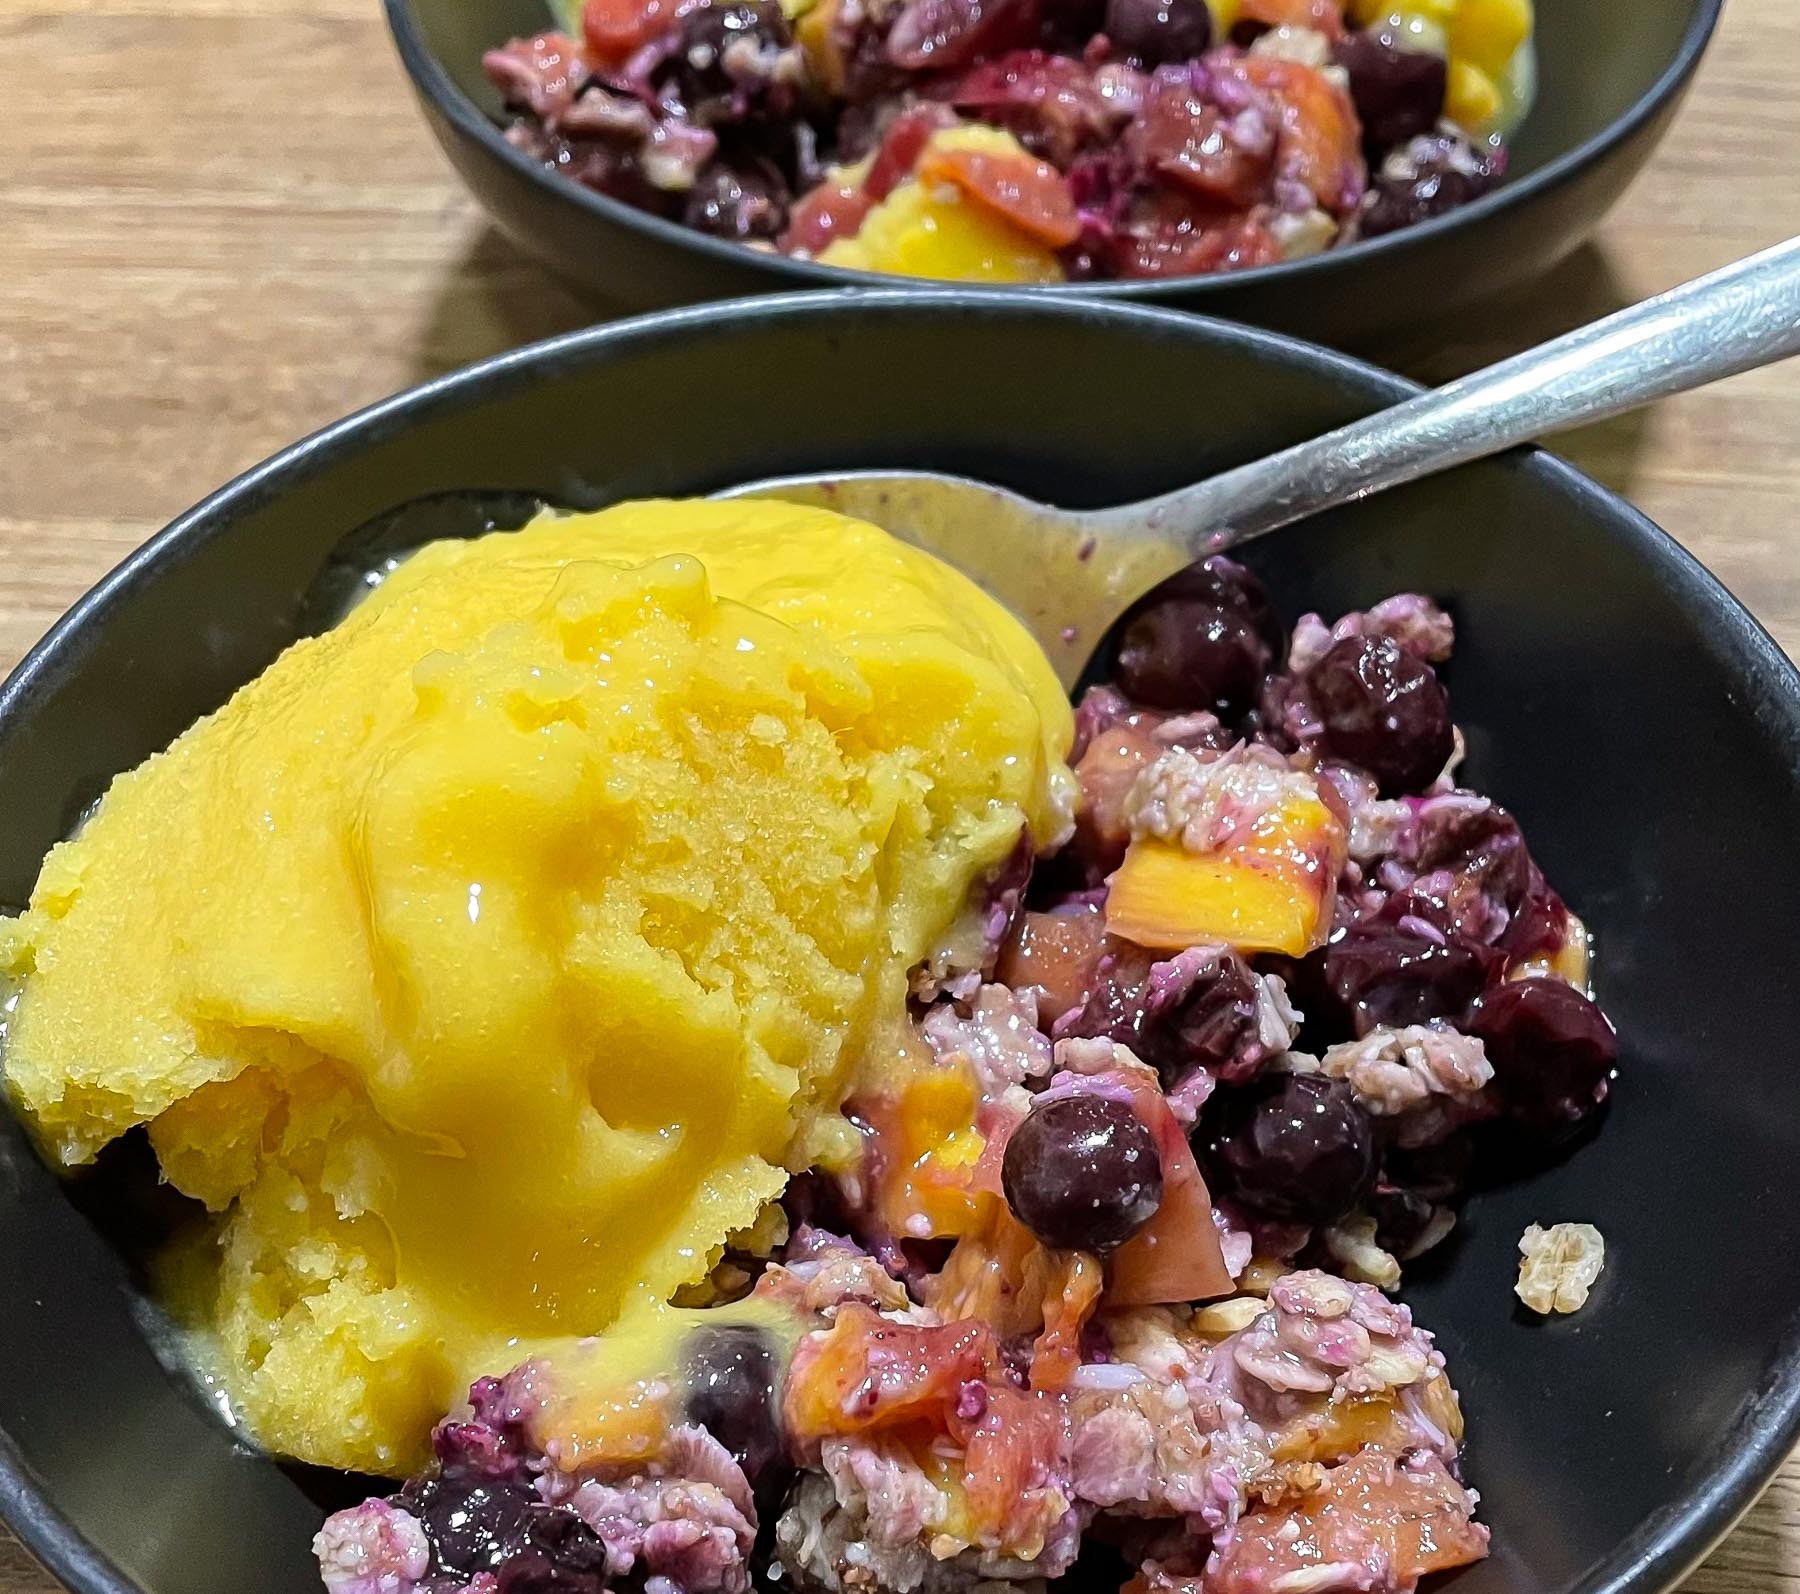 alt="a bowl with mango and blueberry cobbler and topped with mango ice cream."